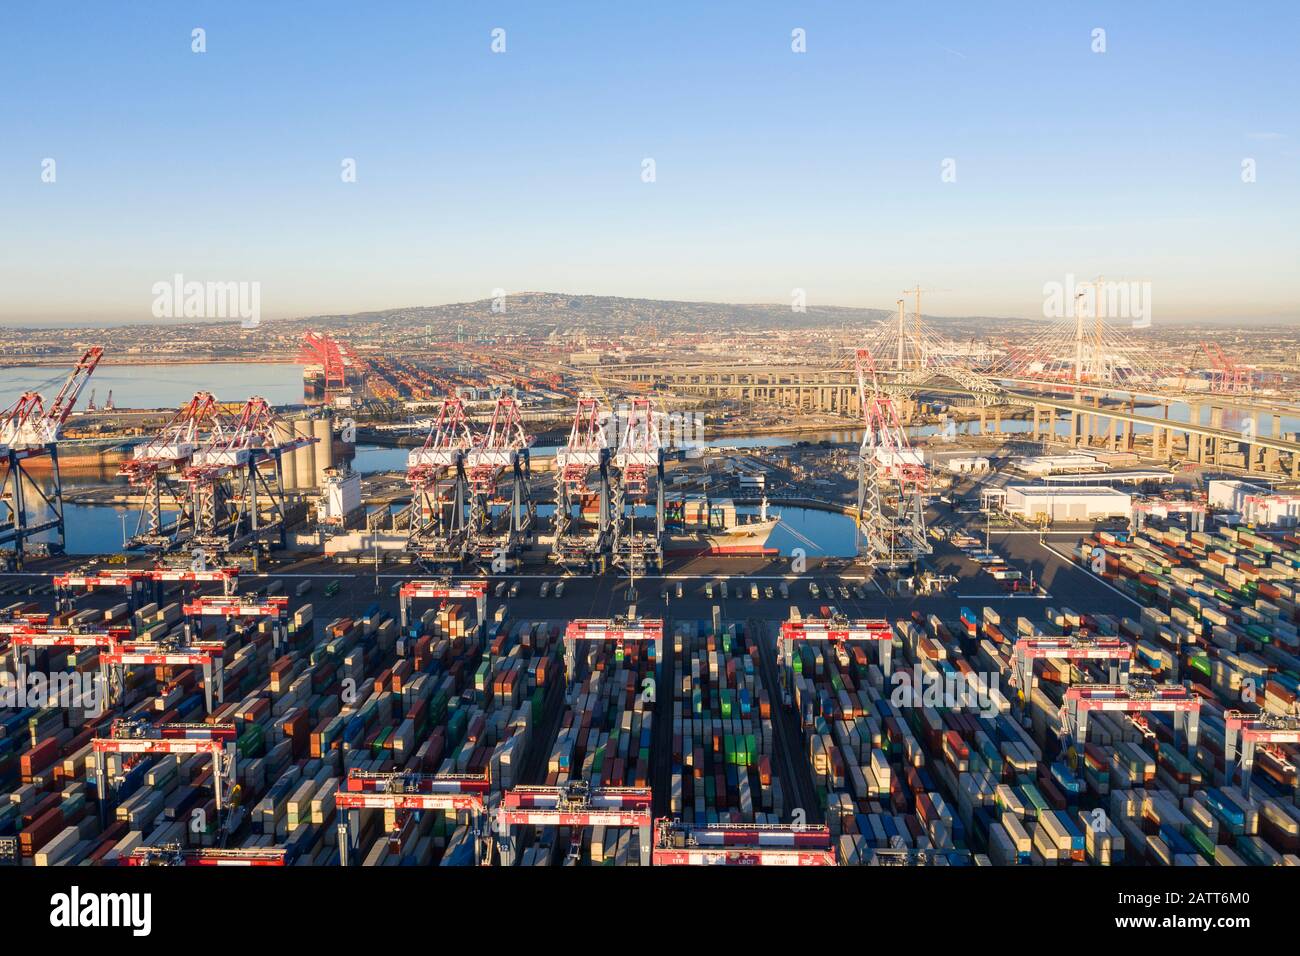 Port of Long Beach and Los Angeles Container Yard Stock Photo